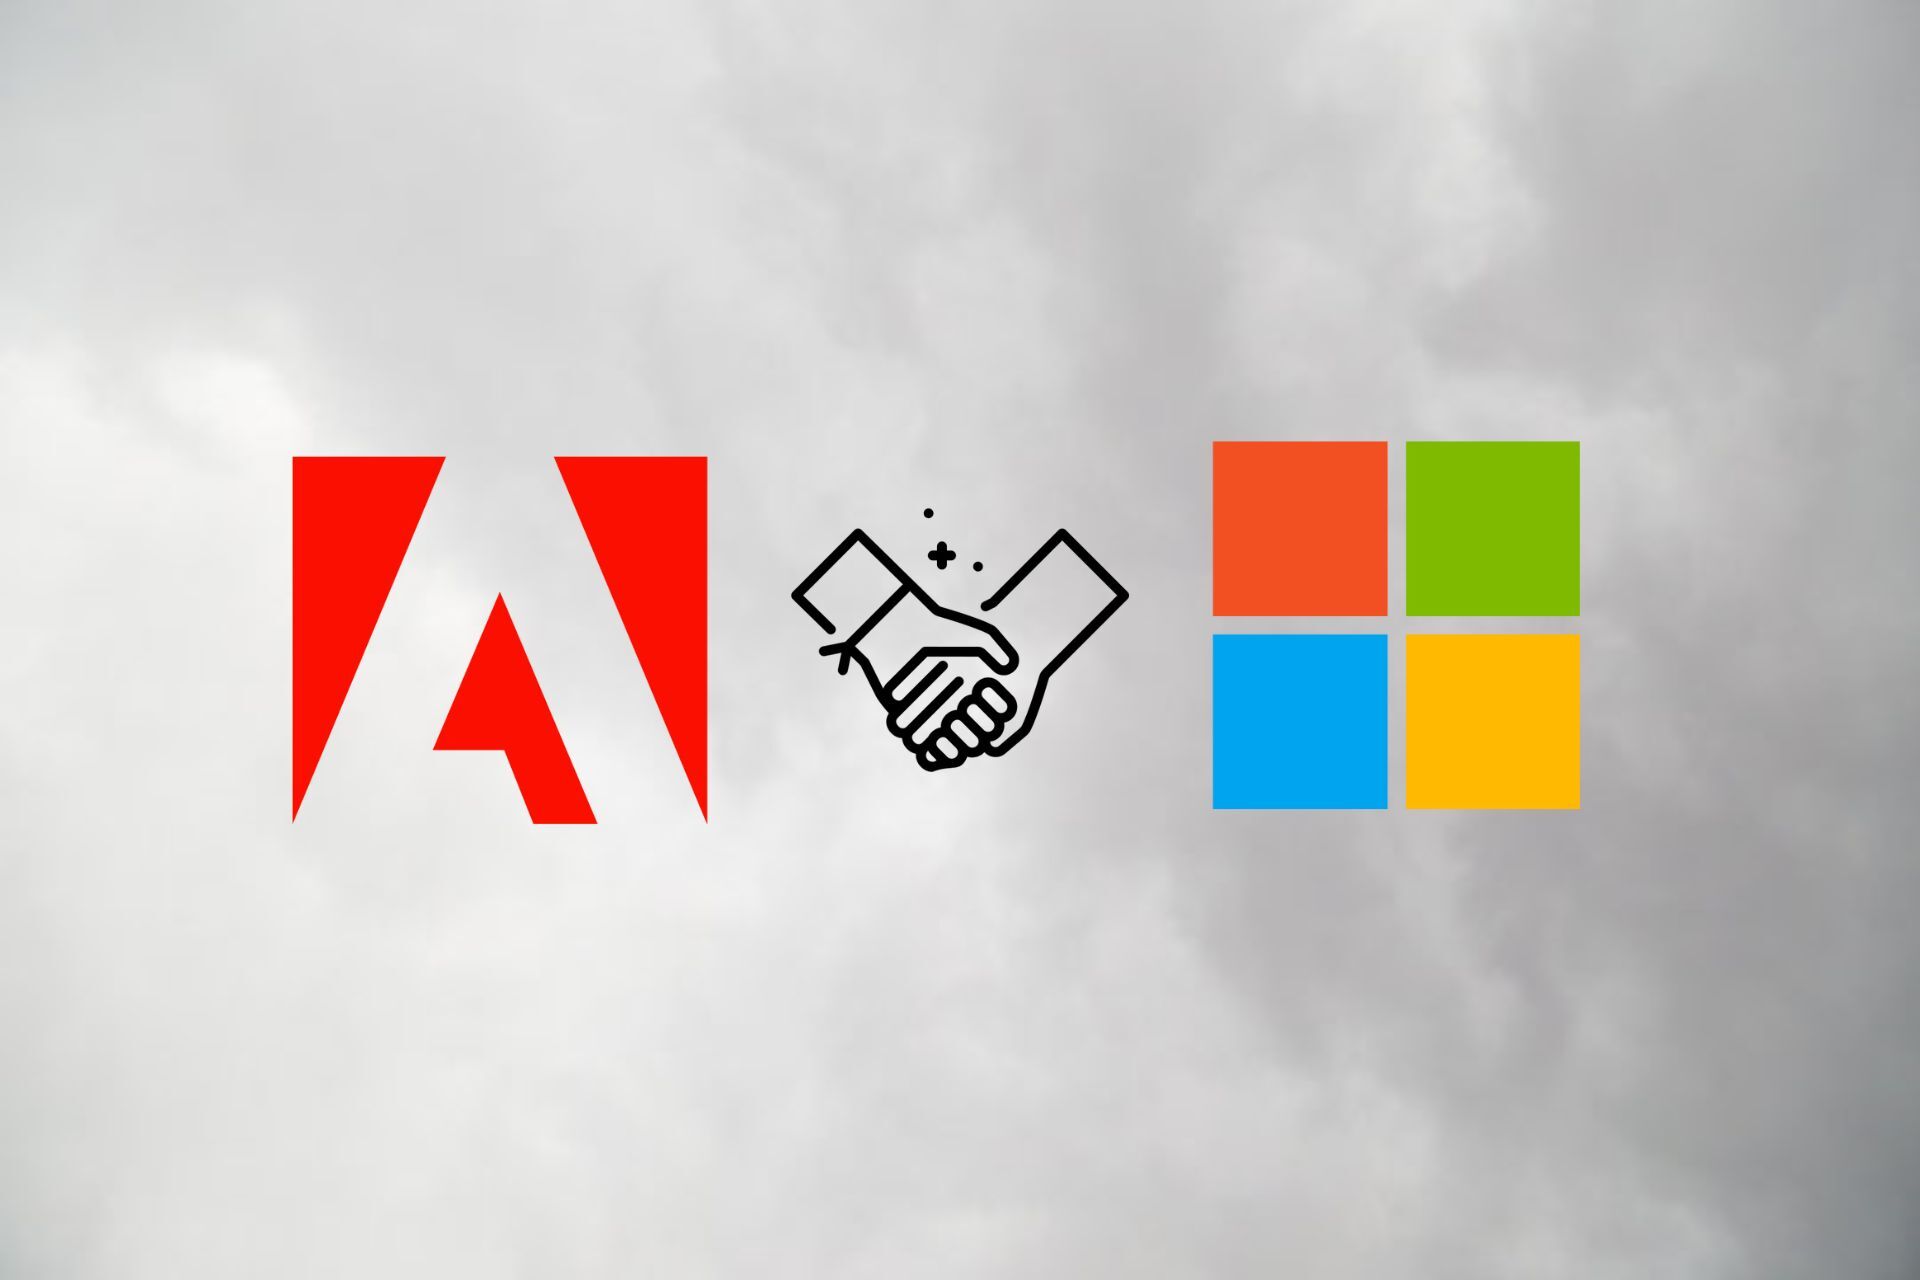 Adobe and Microsoft work together on Copilot